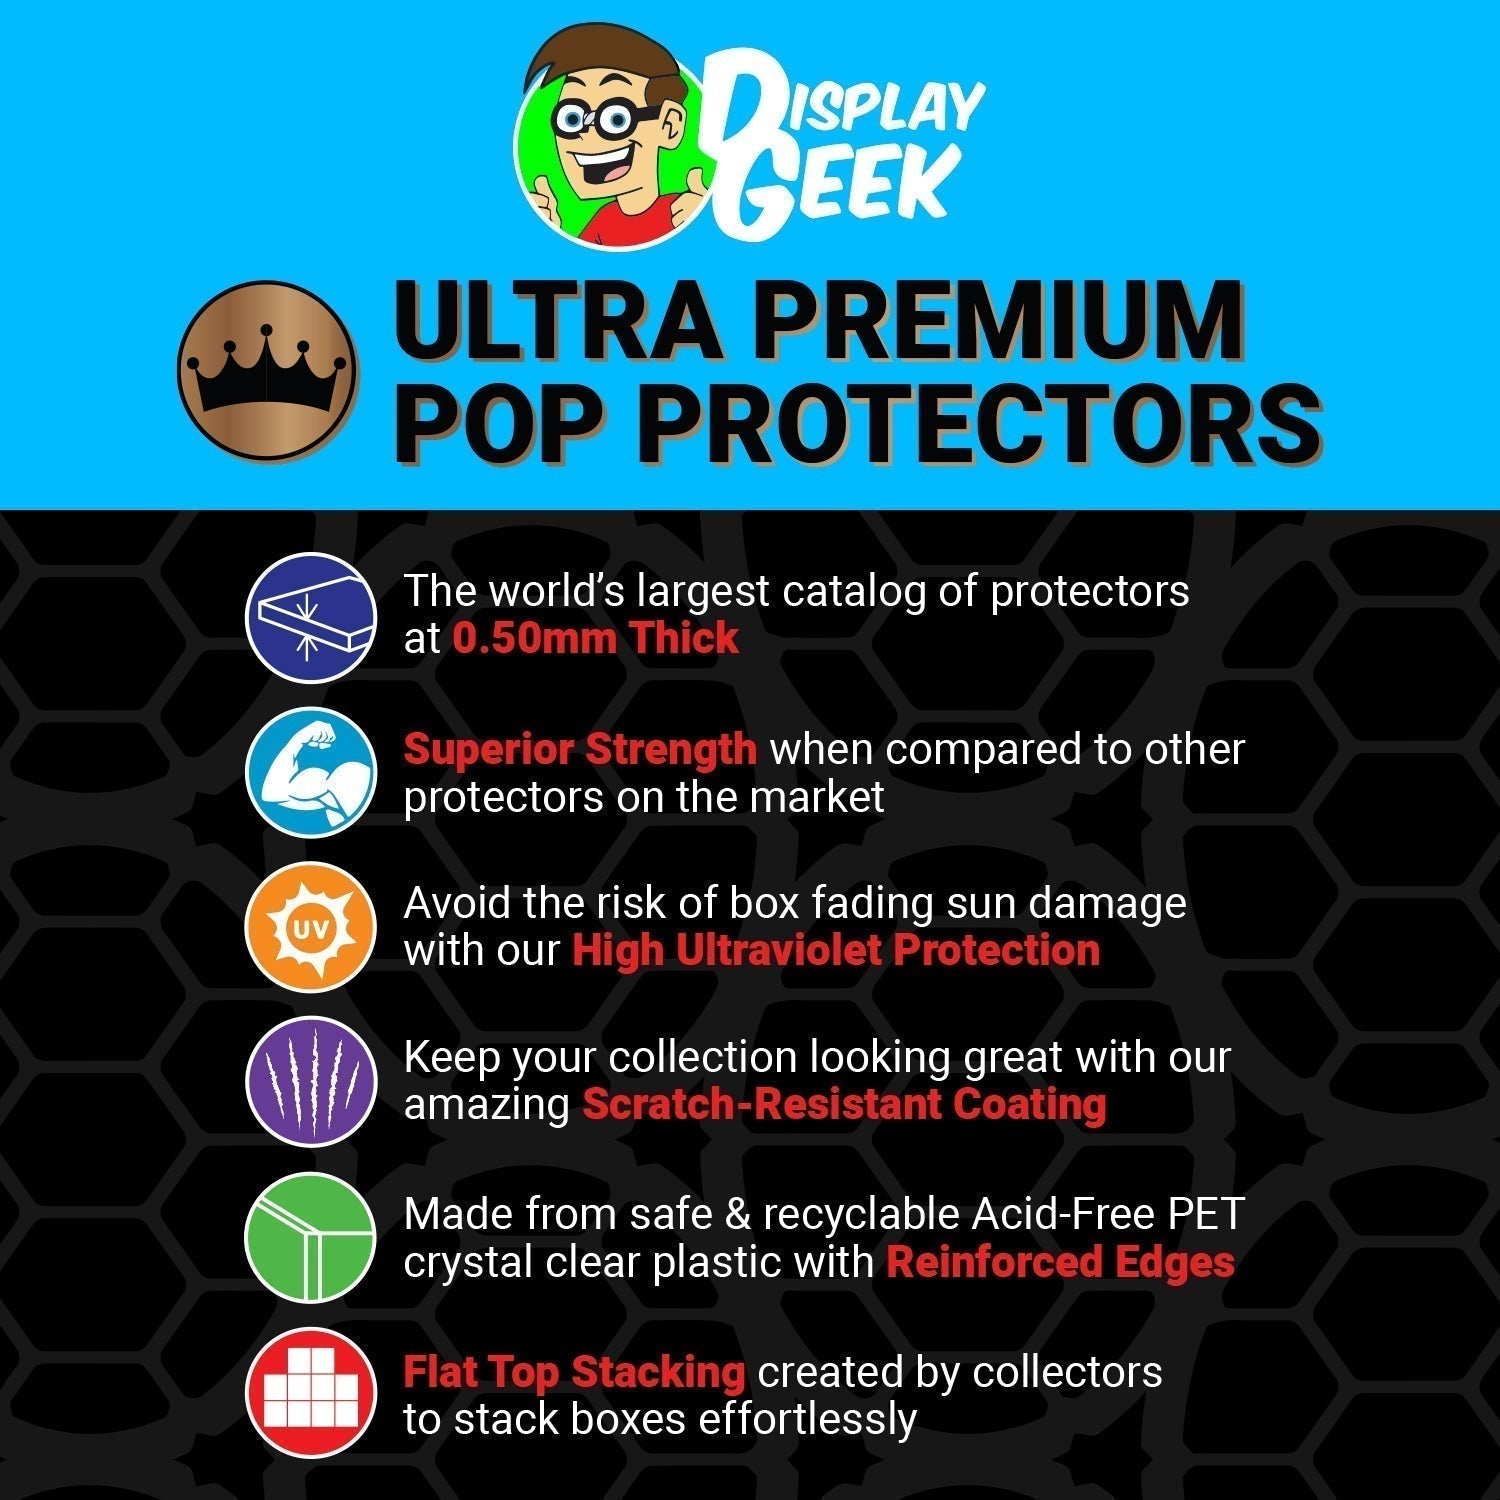 Pop Protector for Pop & Tee Dementor Glow #161 Funko Box - PPG Pop Protector Guide Search Created by Display Geek